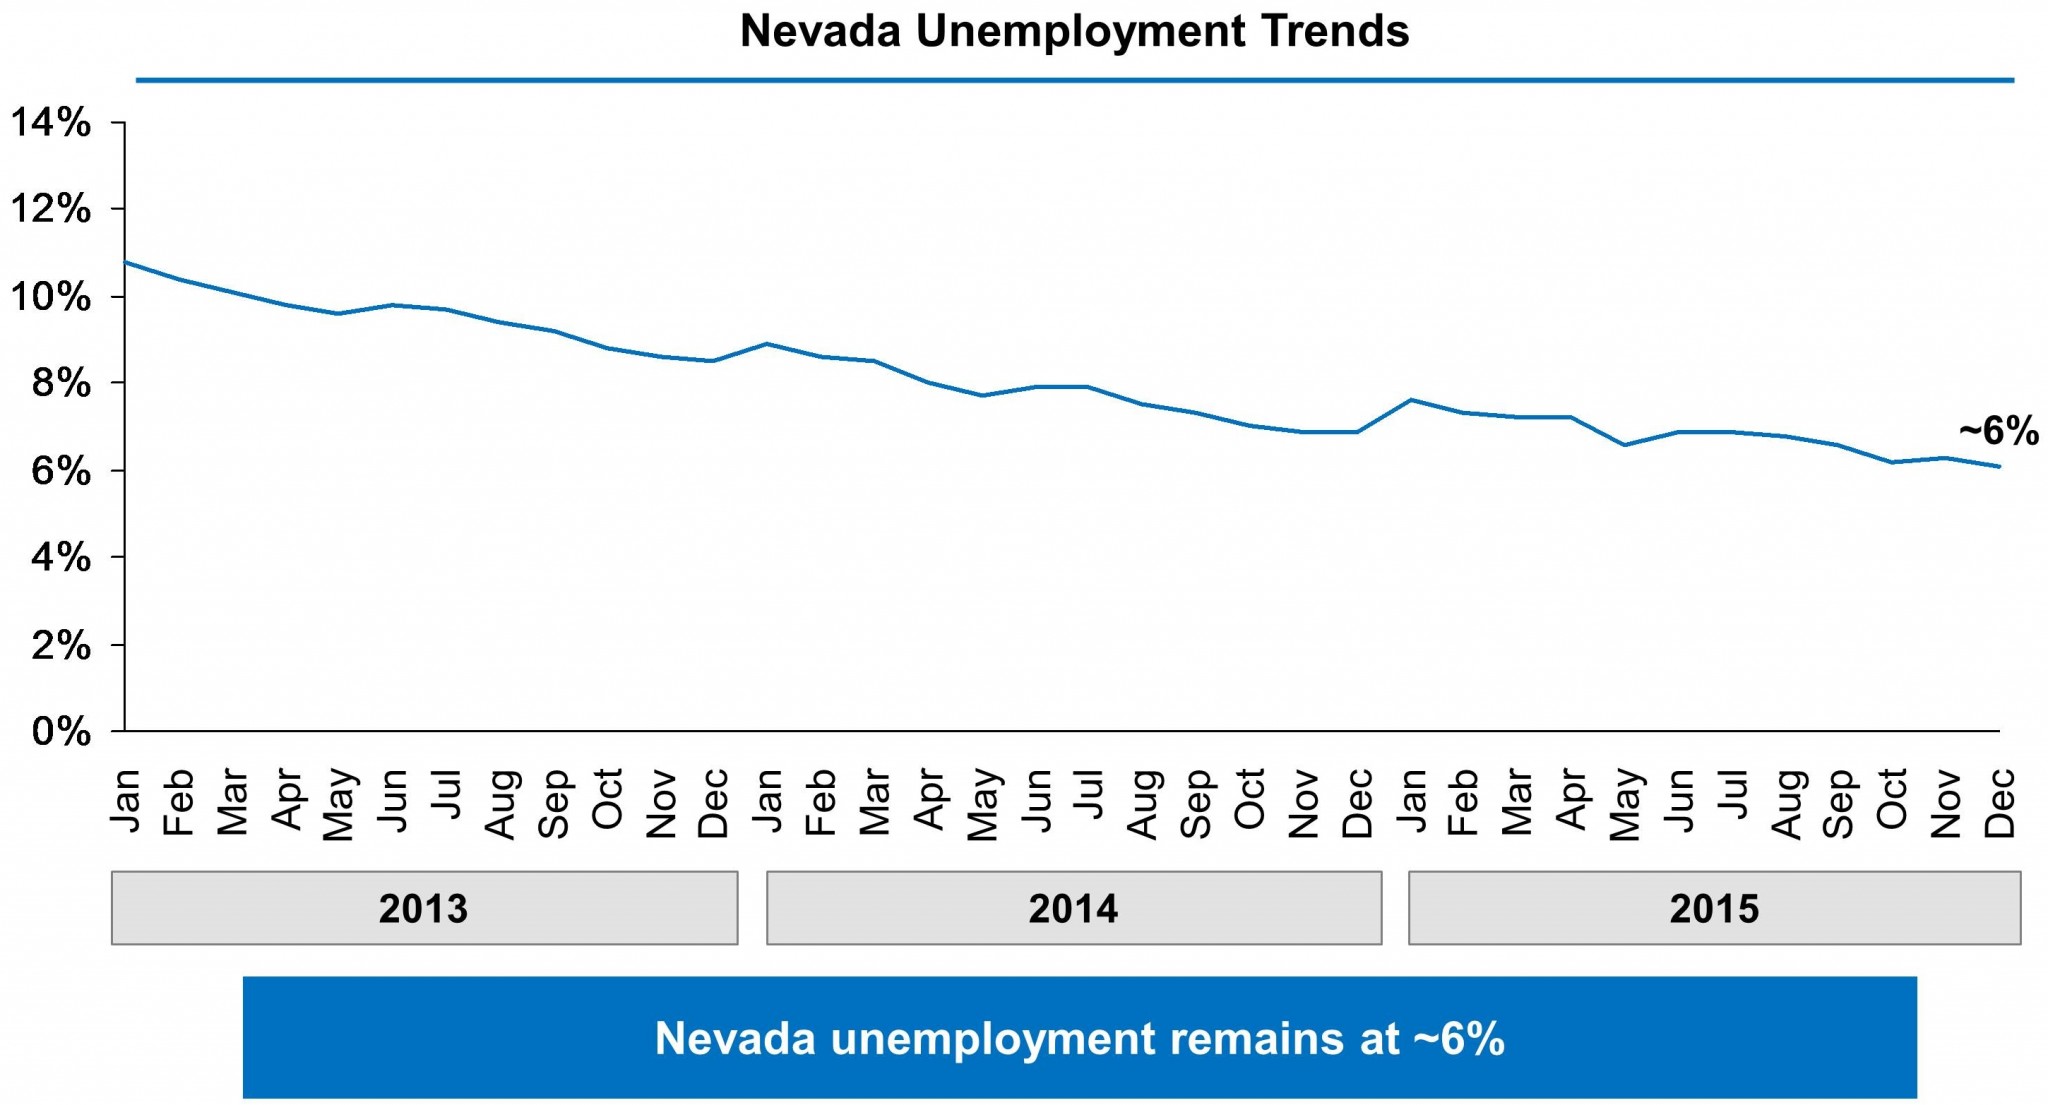 Chart shows Nevada’s unemployment rate falling from almost 11% in January 2013 to approximately 6% in December 2015.